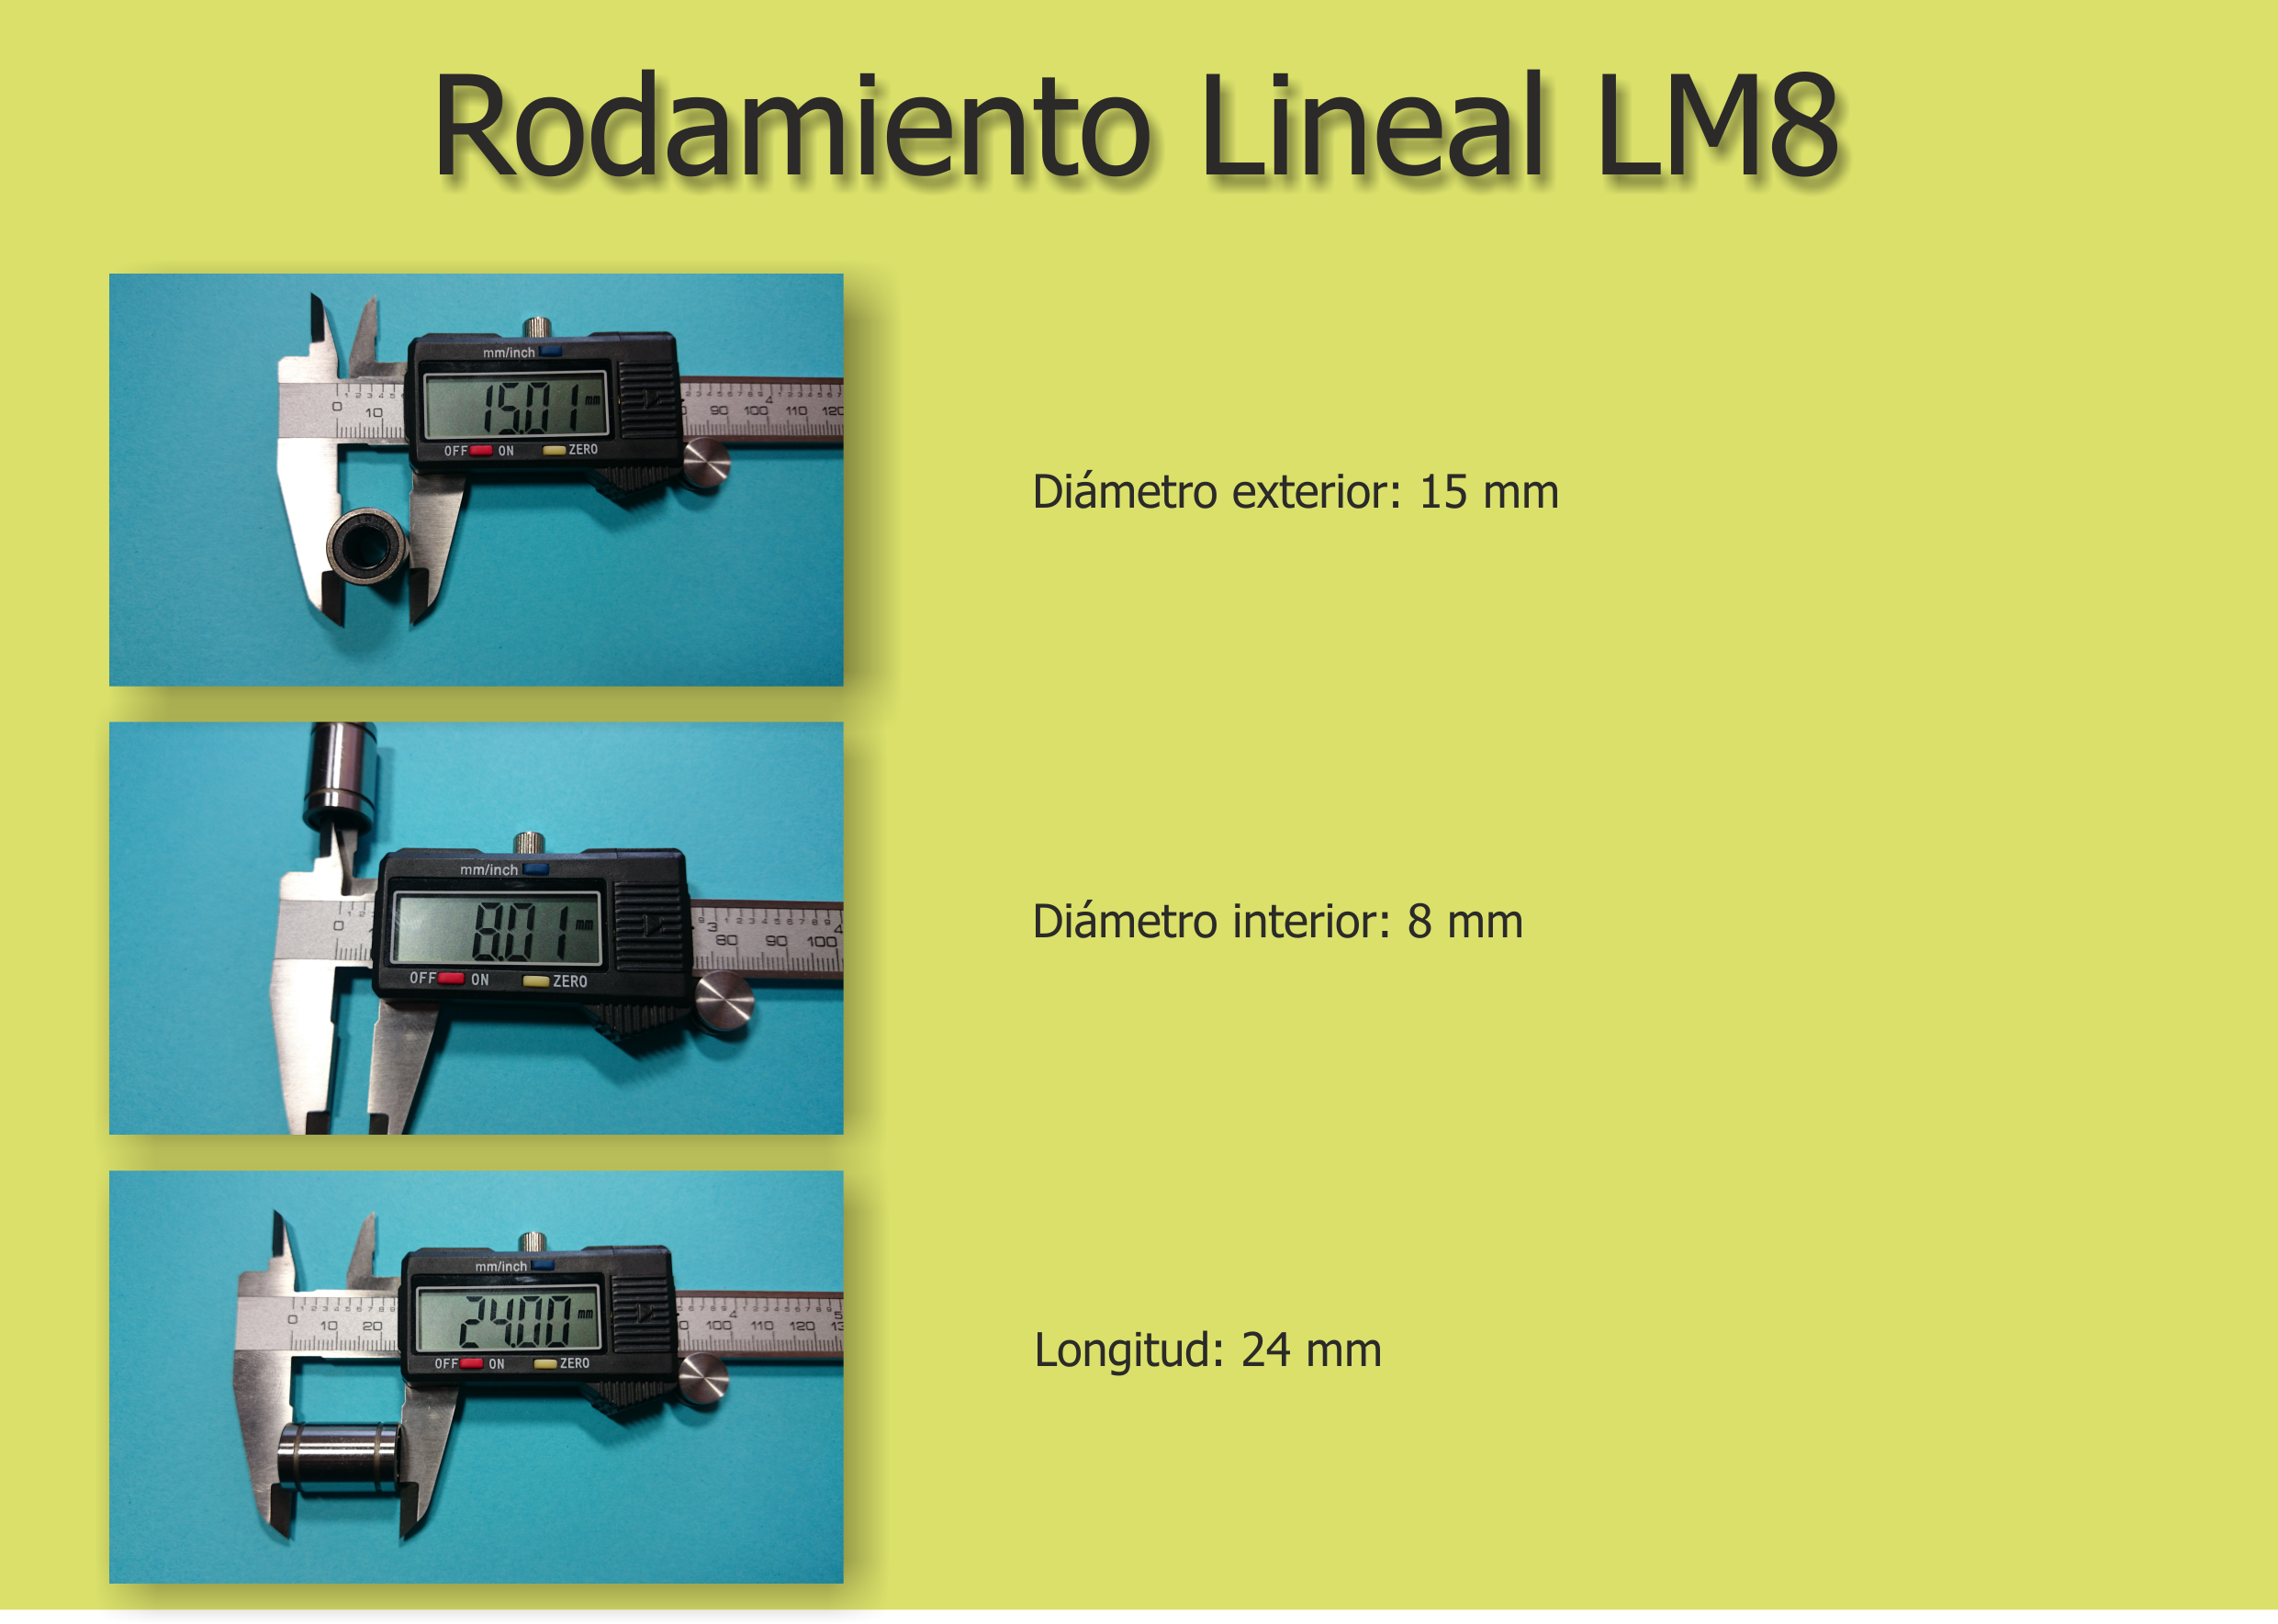 Rodamiento Lineal LM8.png